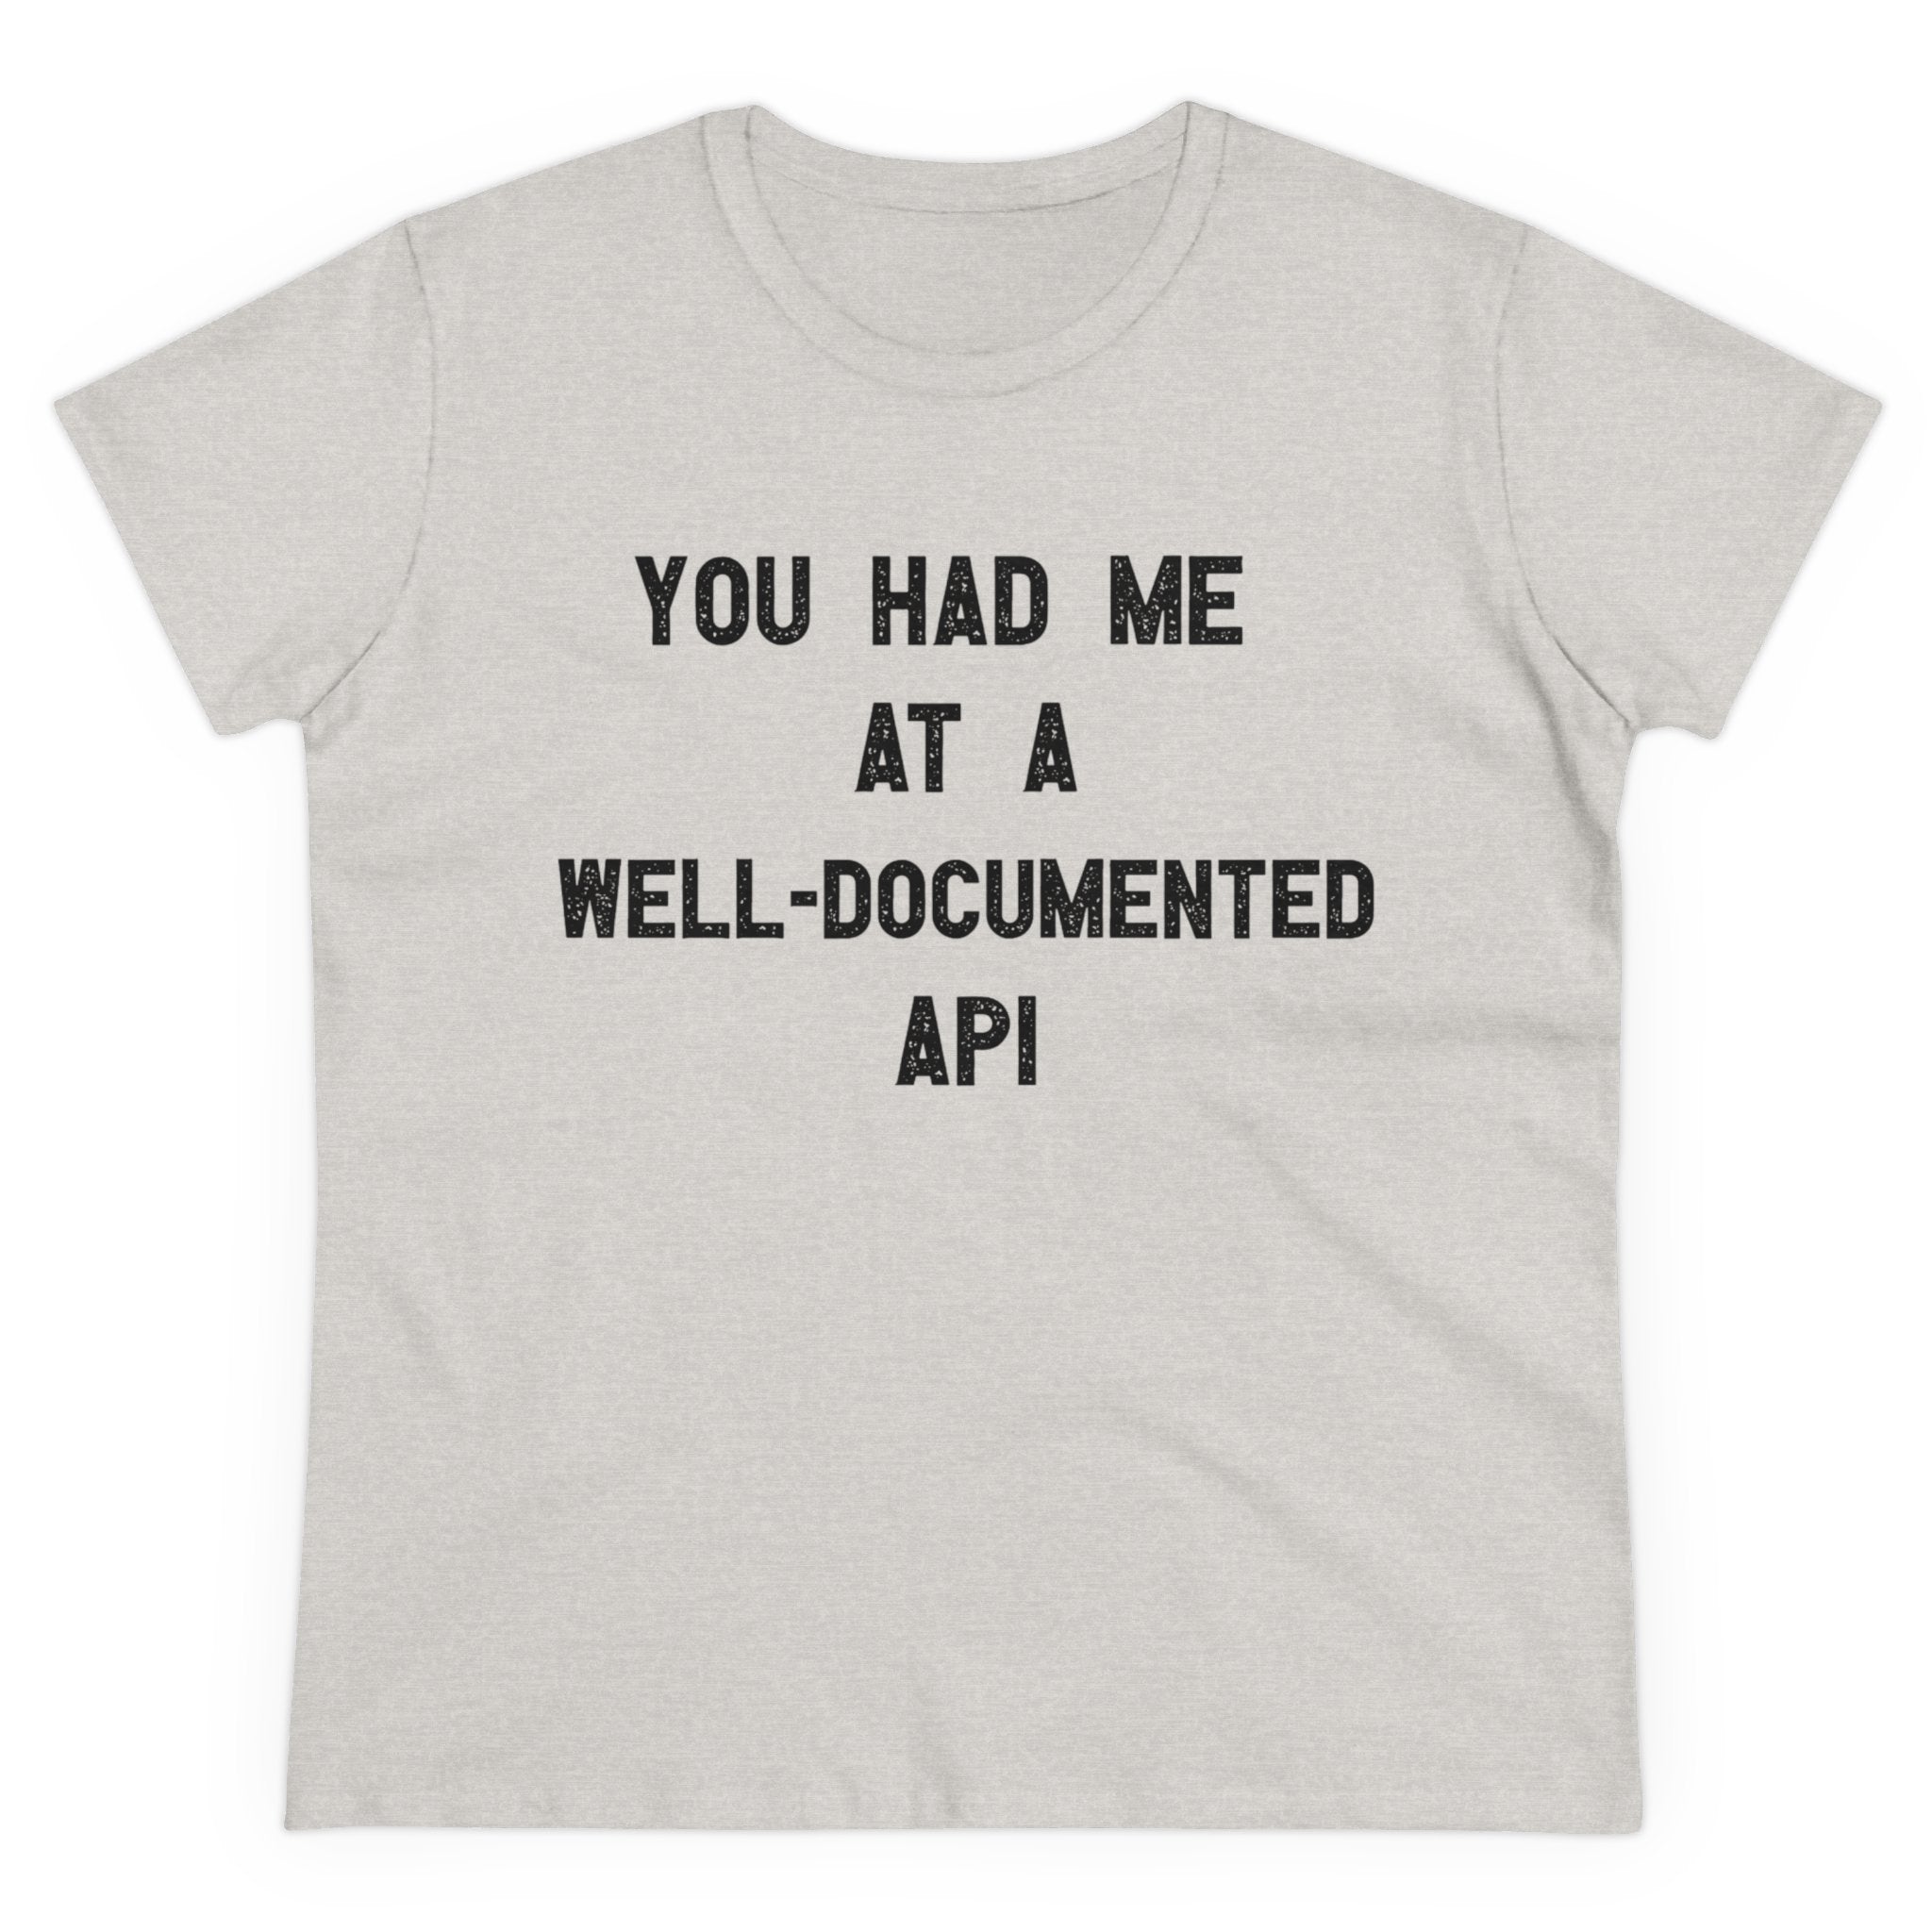 You Had Me At A Well-Documented API - Women's Tee